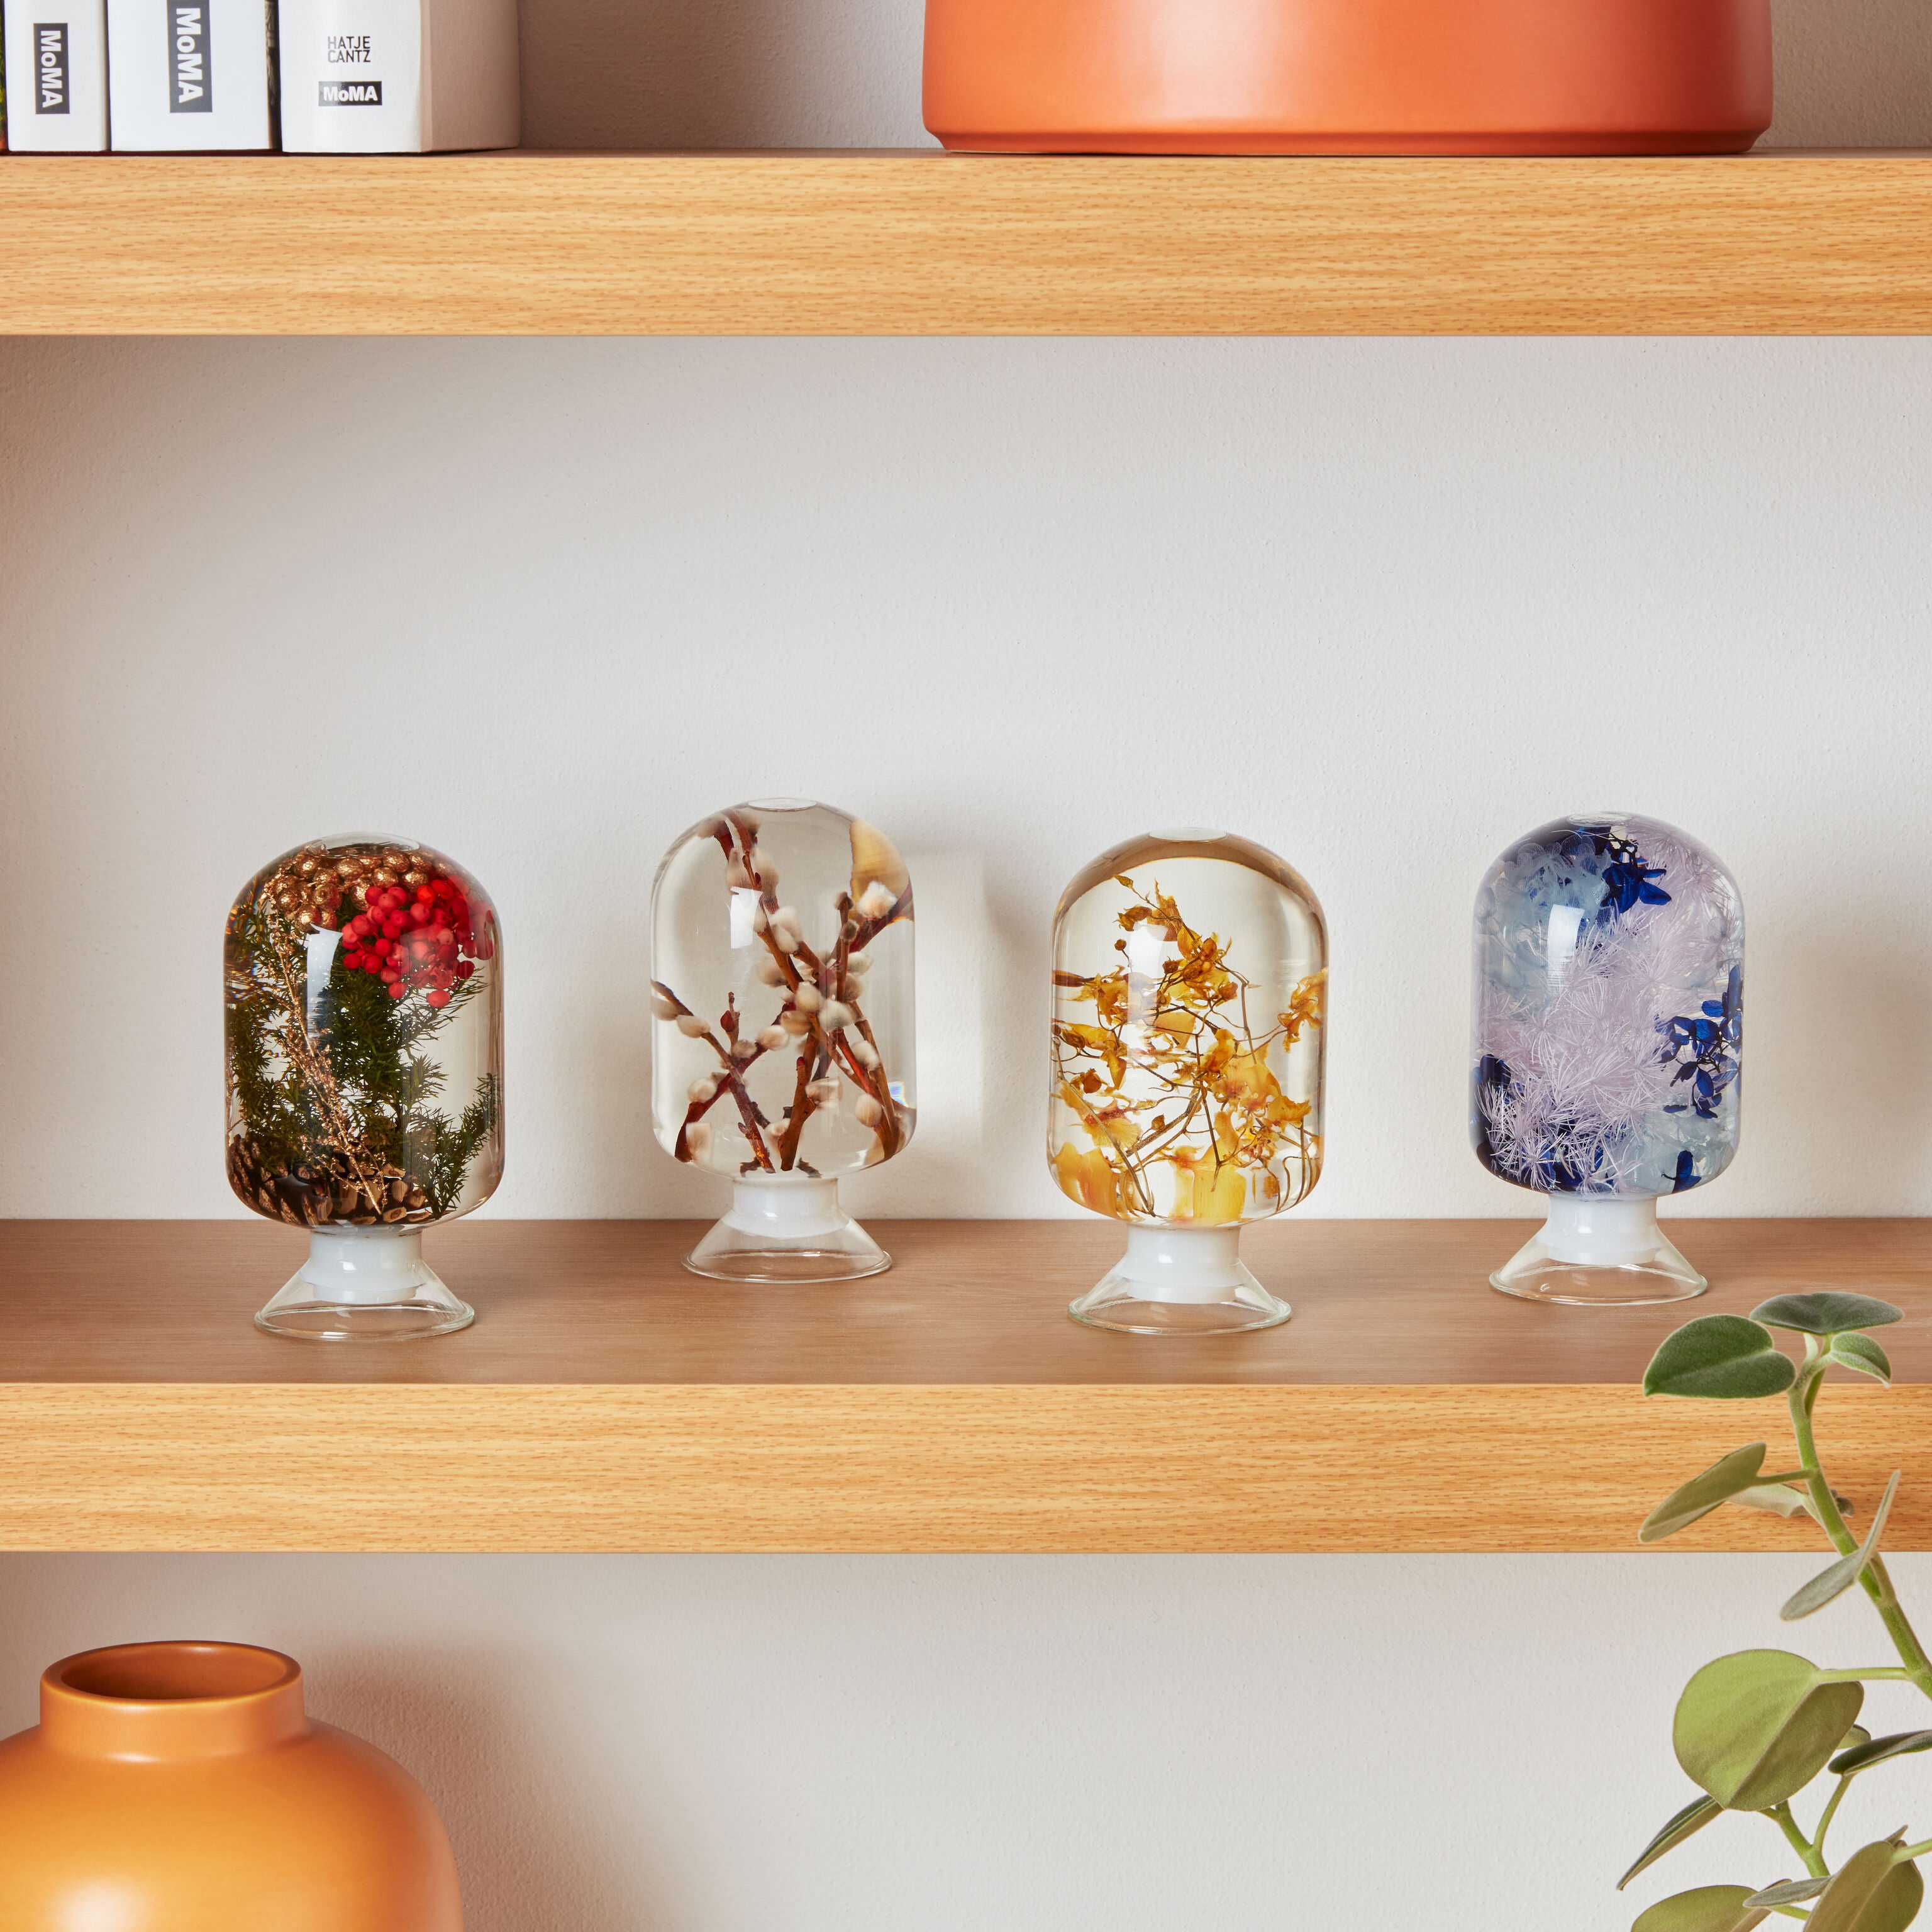 Pieces of Time Flower Objet d'Art – MoMA Design Store